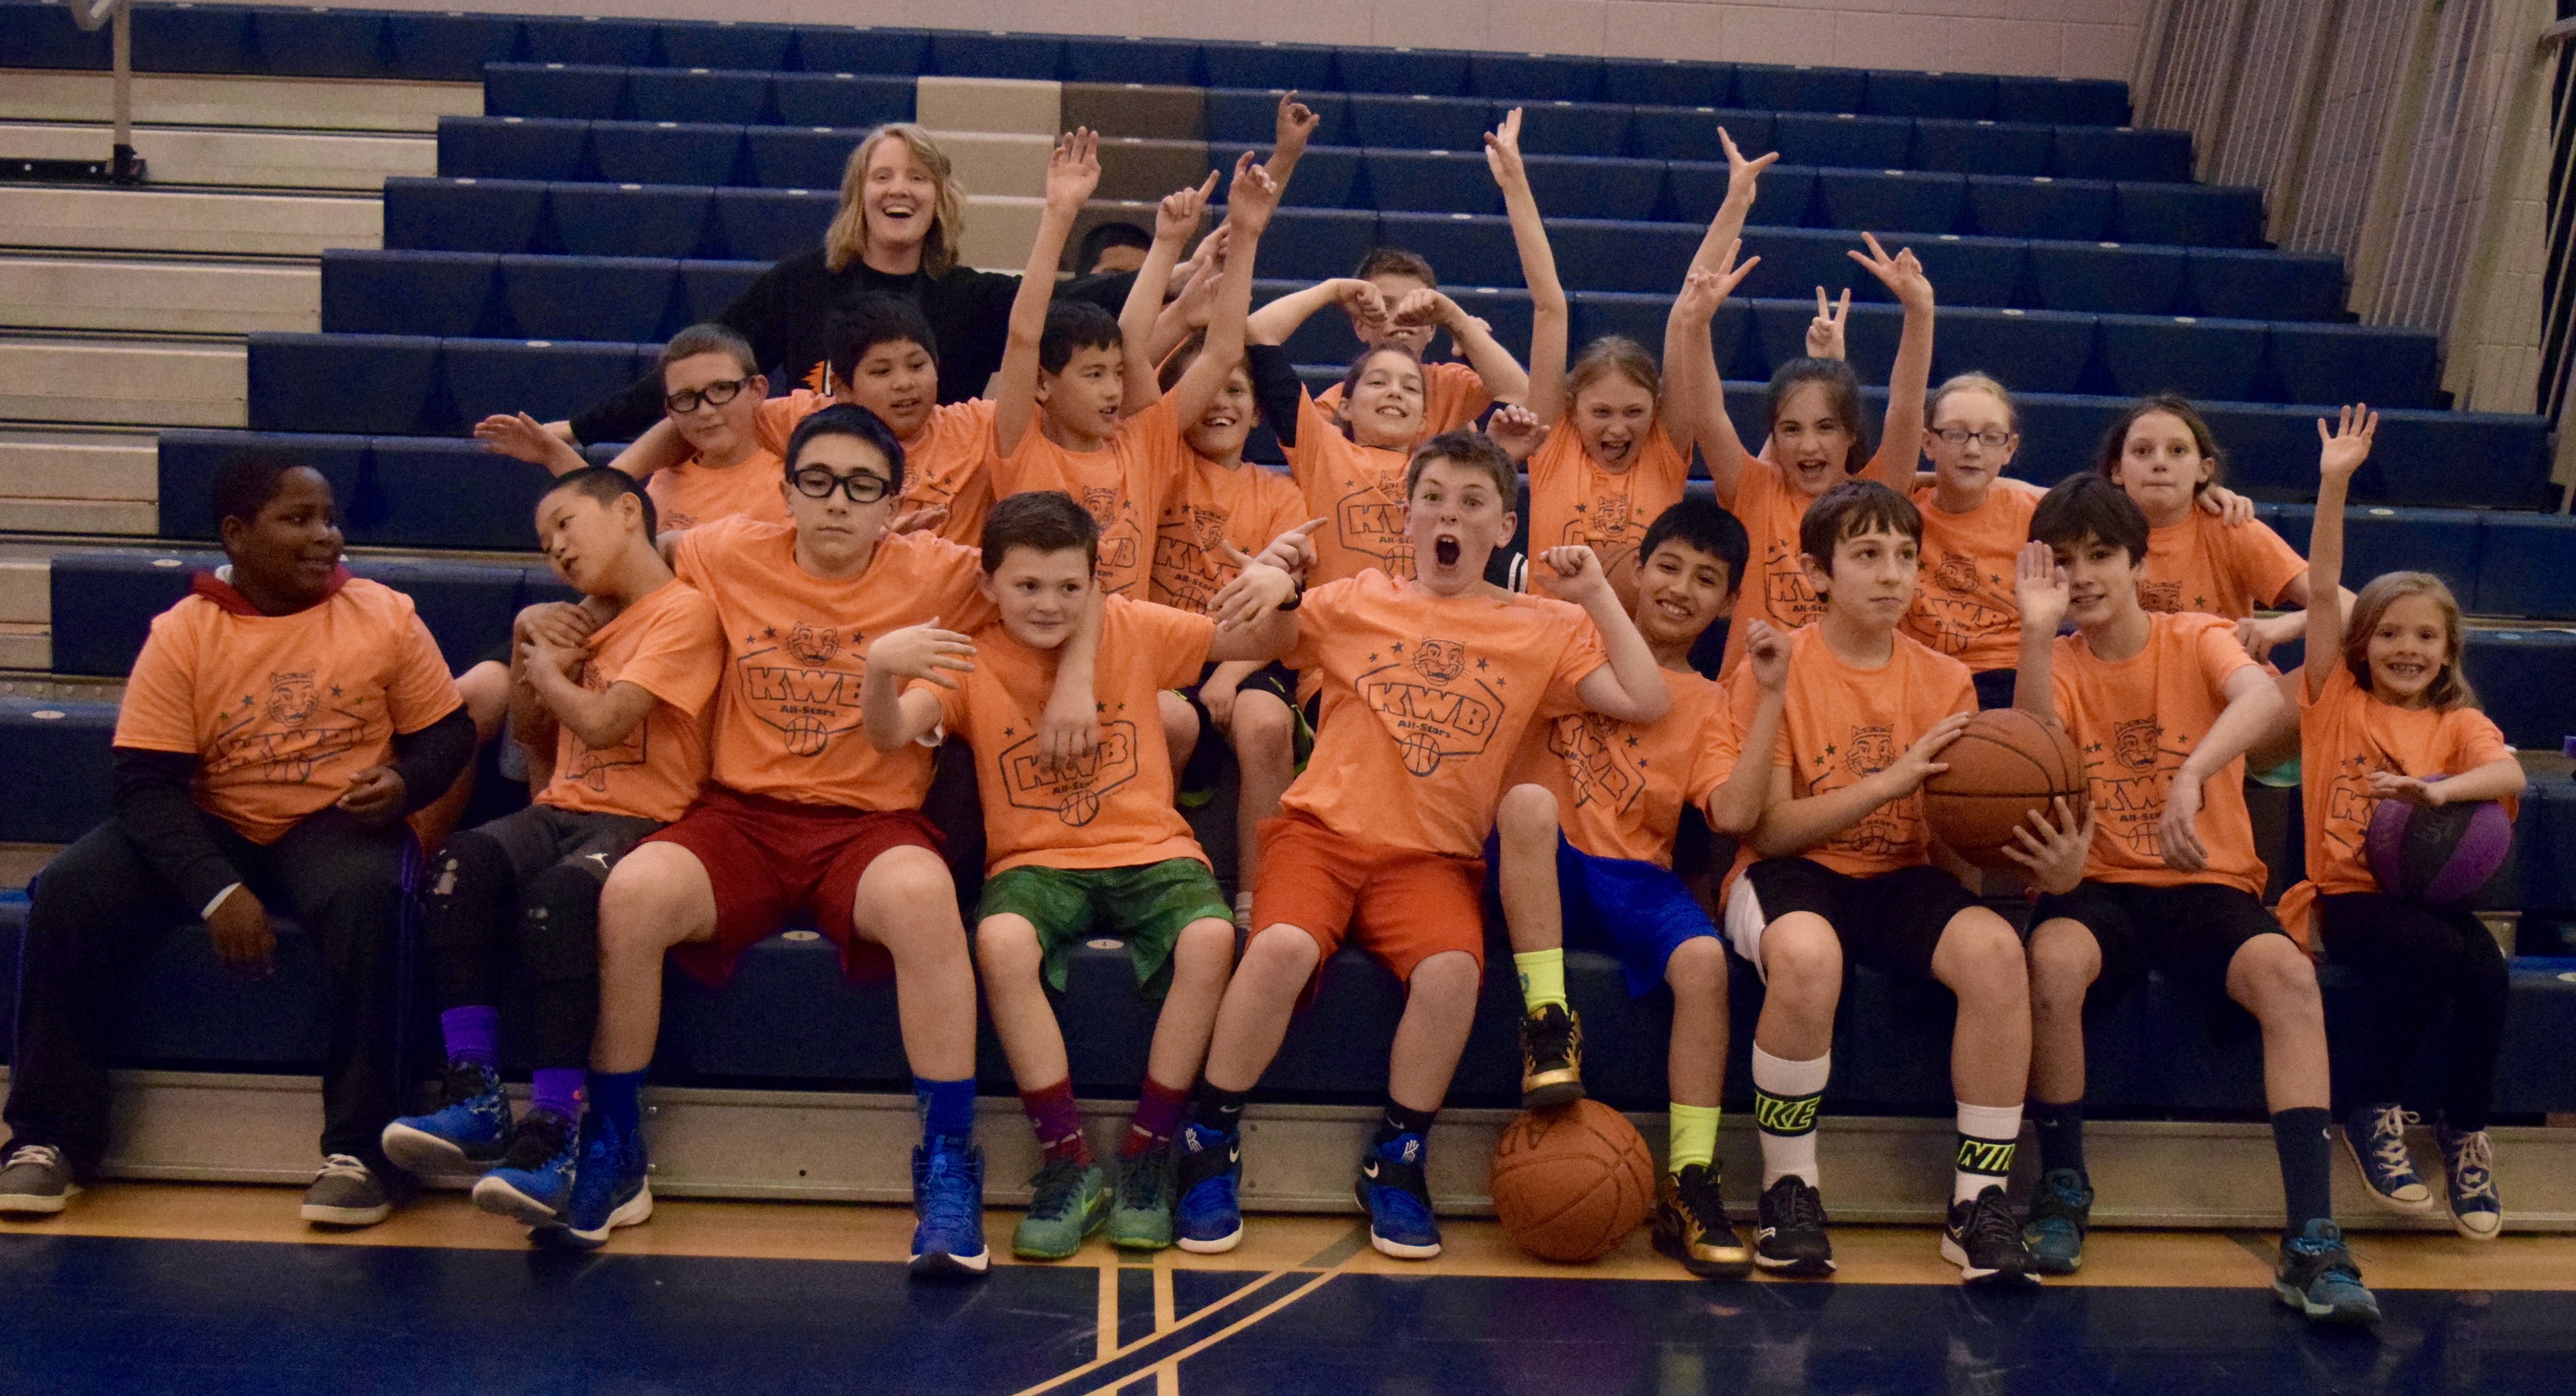 5th grade basketball team picture